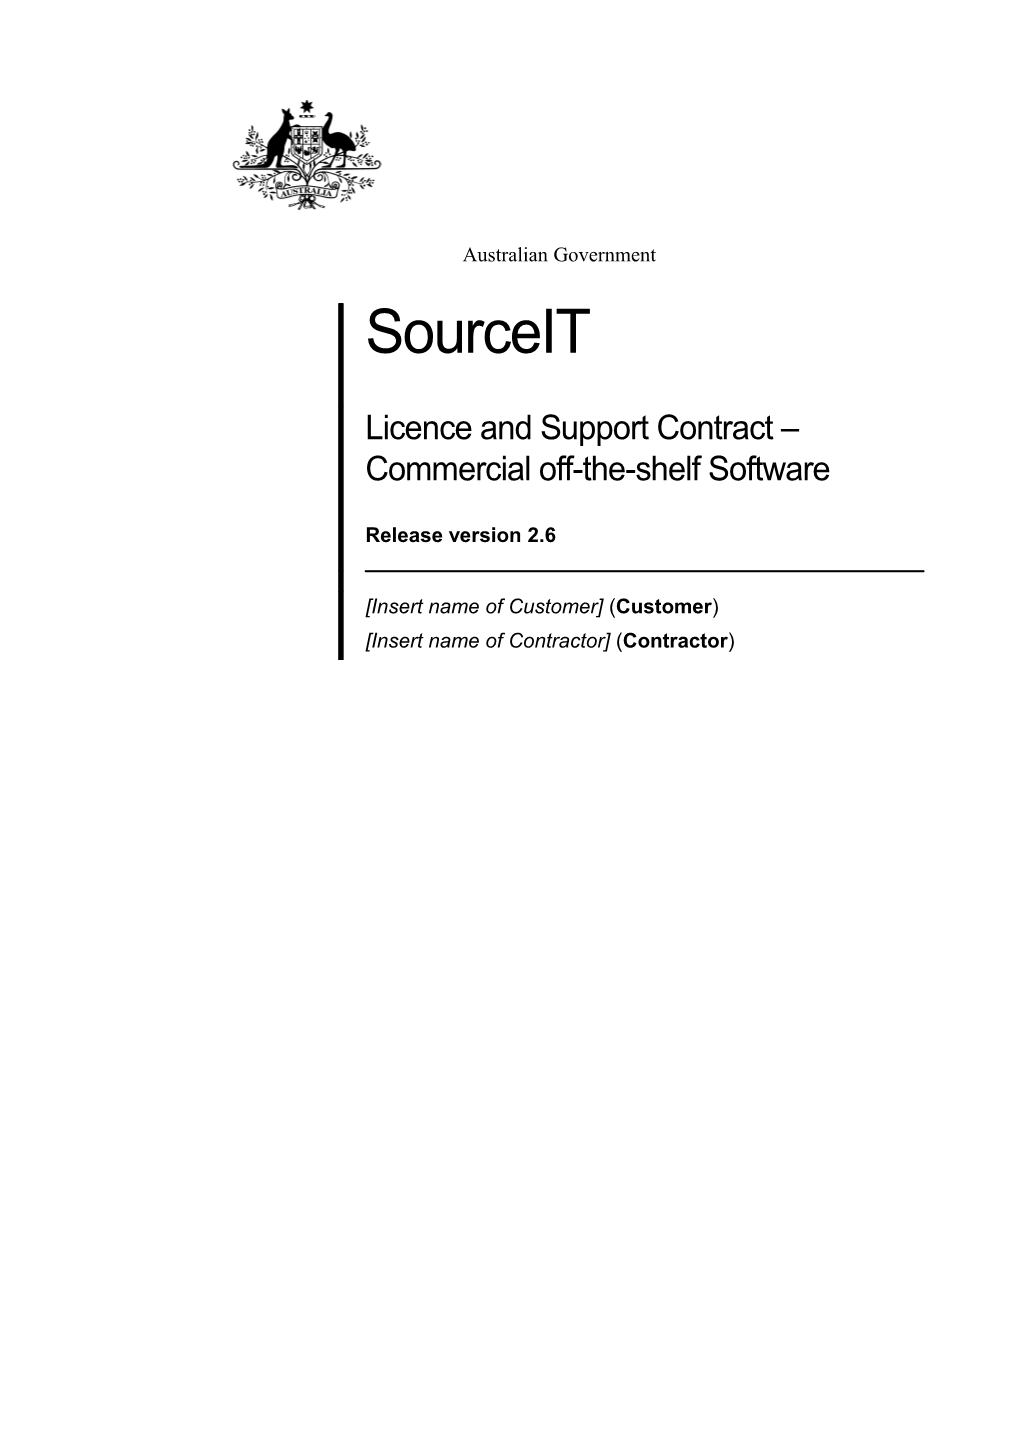 Source IT Licence and Support Contract - Commercial Off-The-Shelf Software - Release Version 2.3